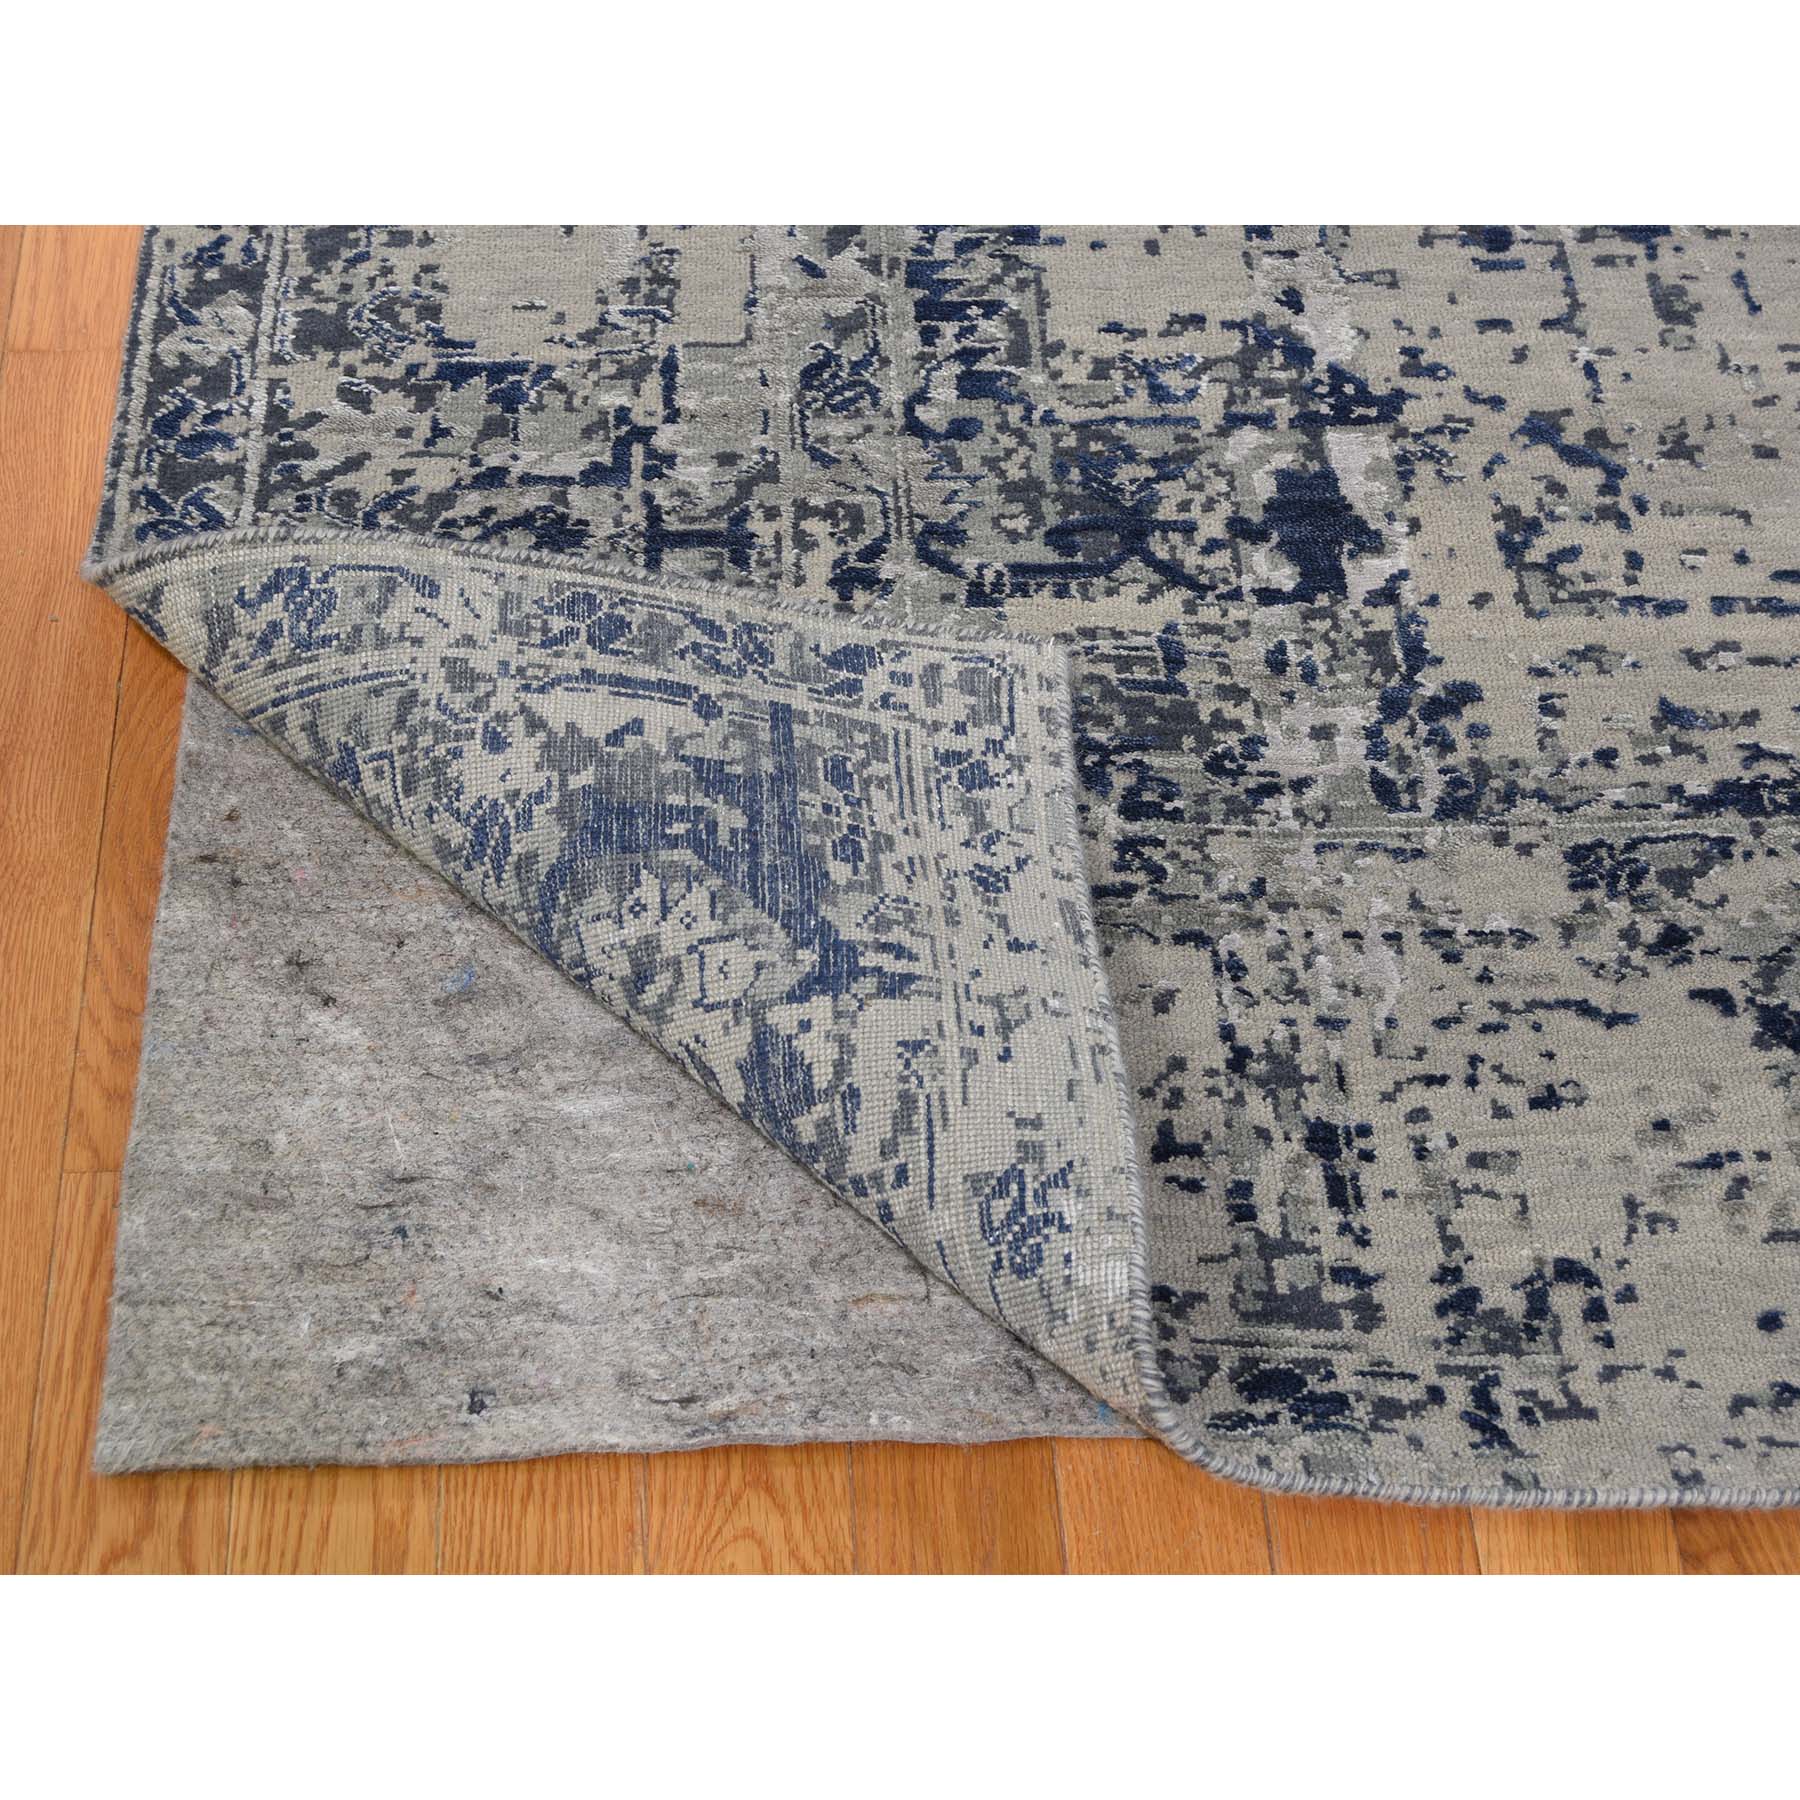 8-2 x10-1  Blue-Gray Heriz Design Wool and Silk Hand-Knotted Fine Oriental Rug 